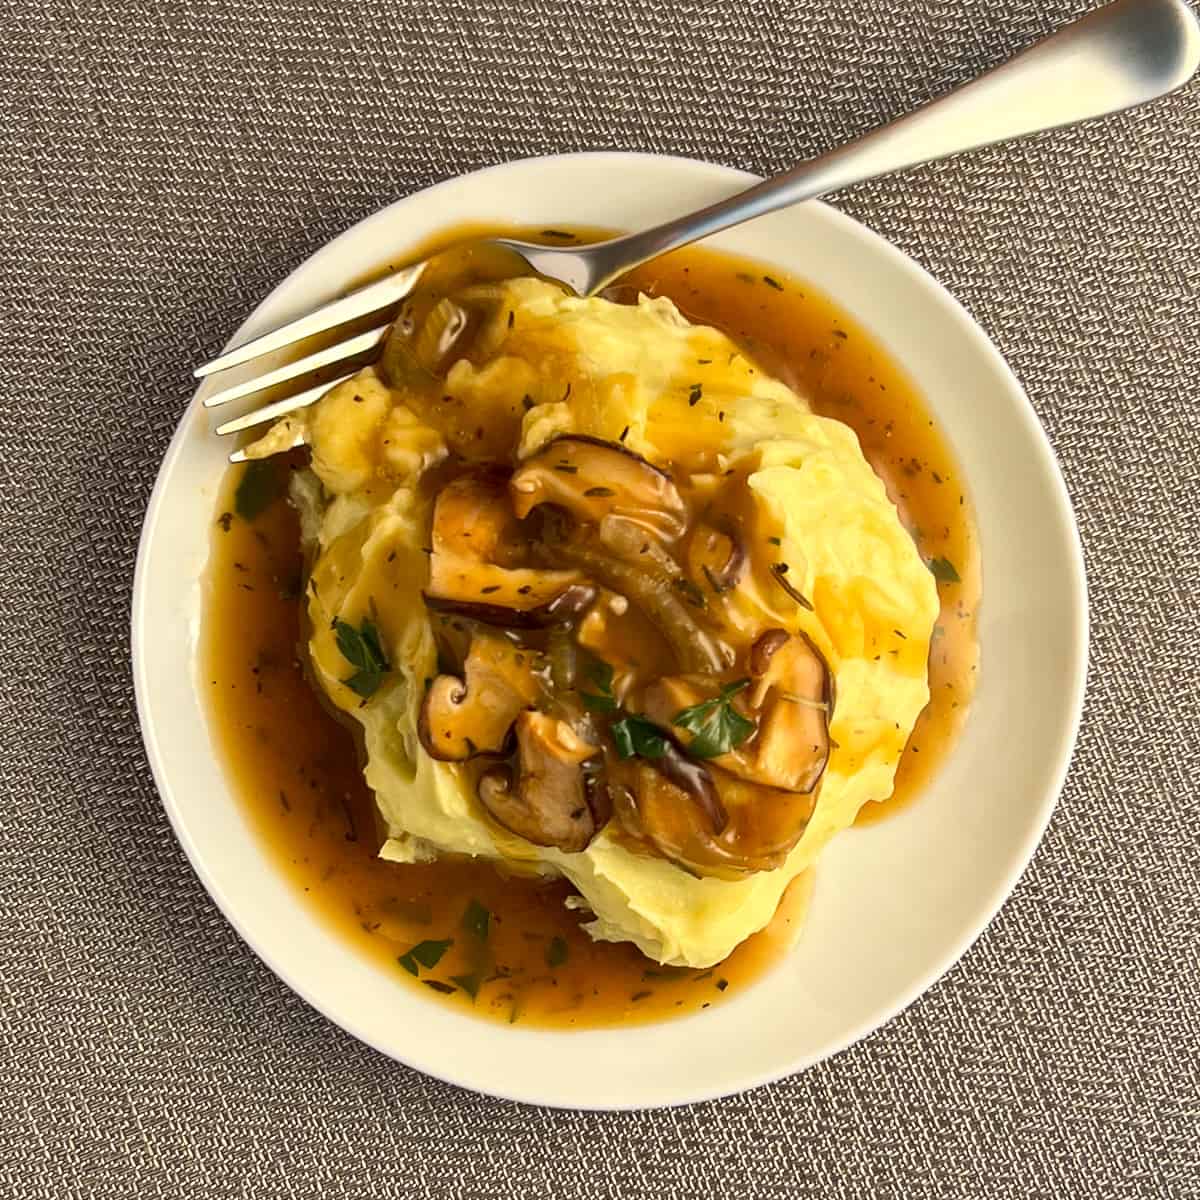 top view of a plate of mashed potatoes with vegan mushroom gravy and fork on the side